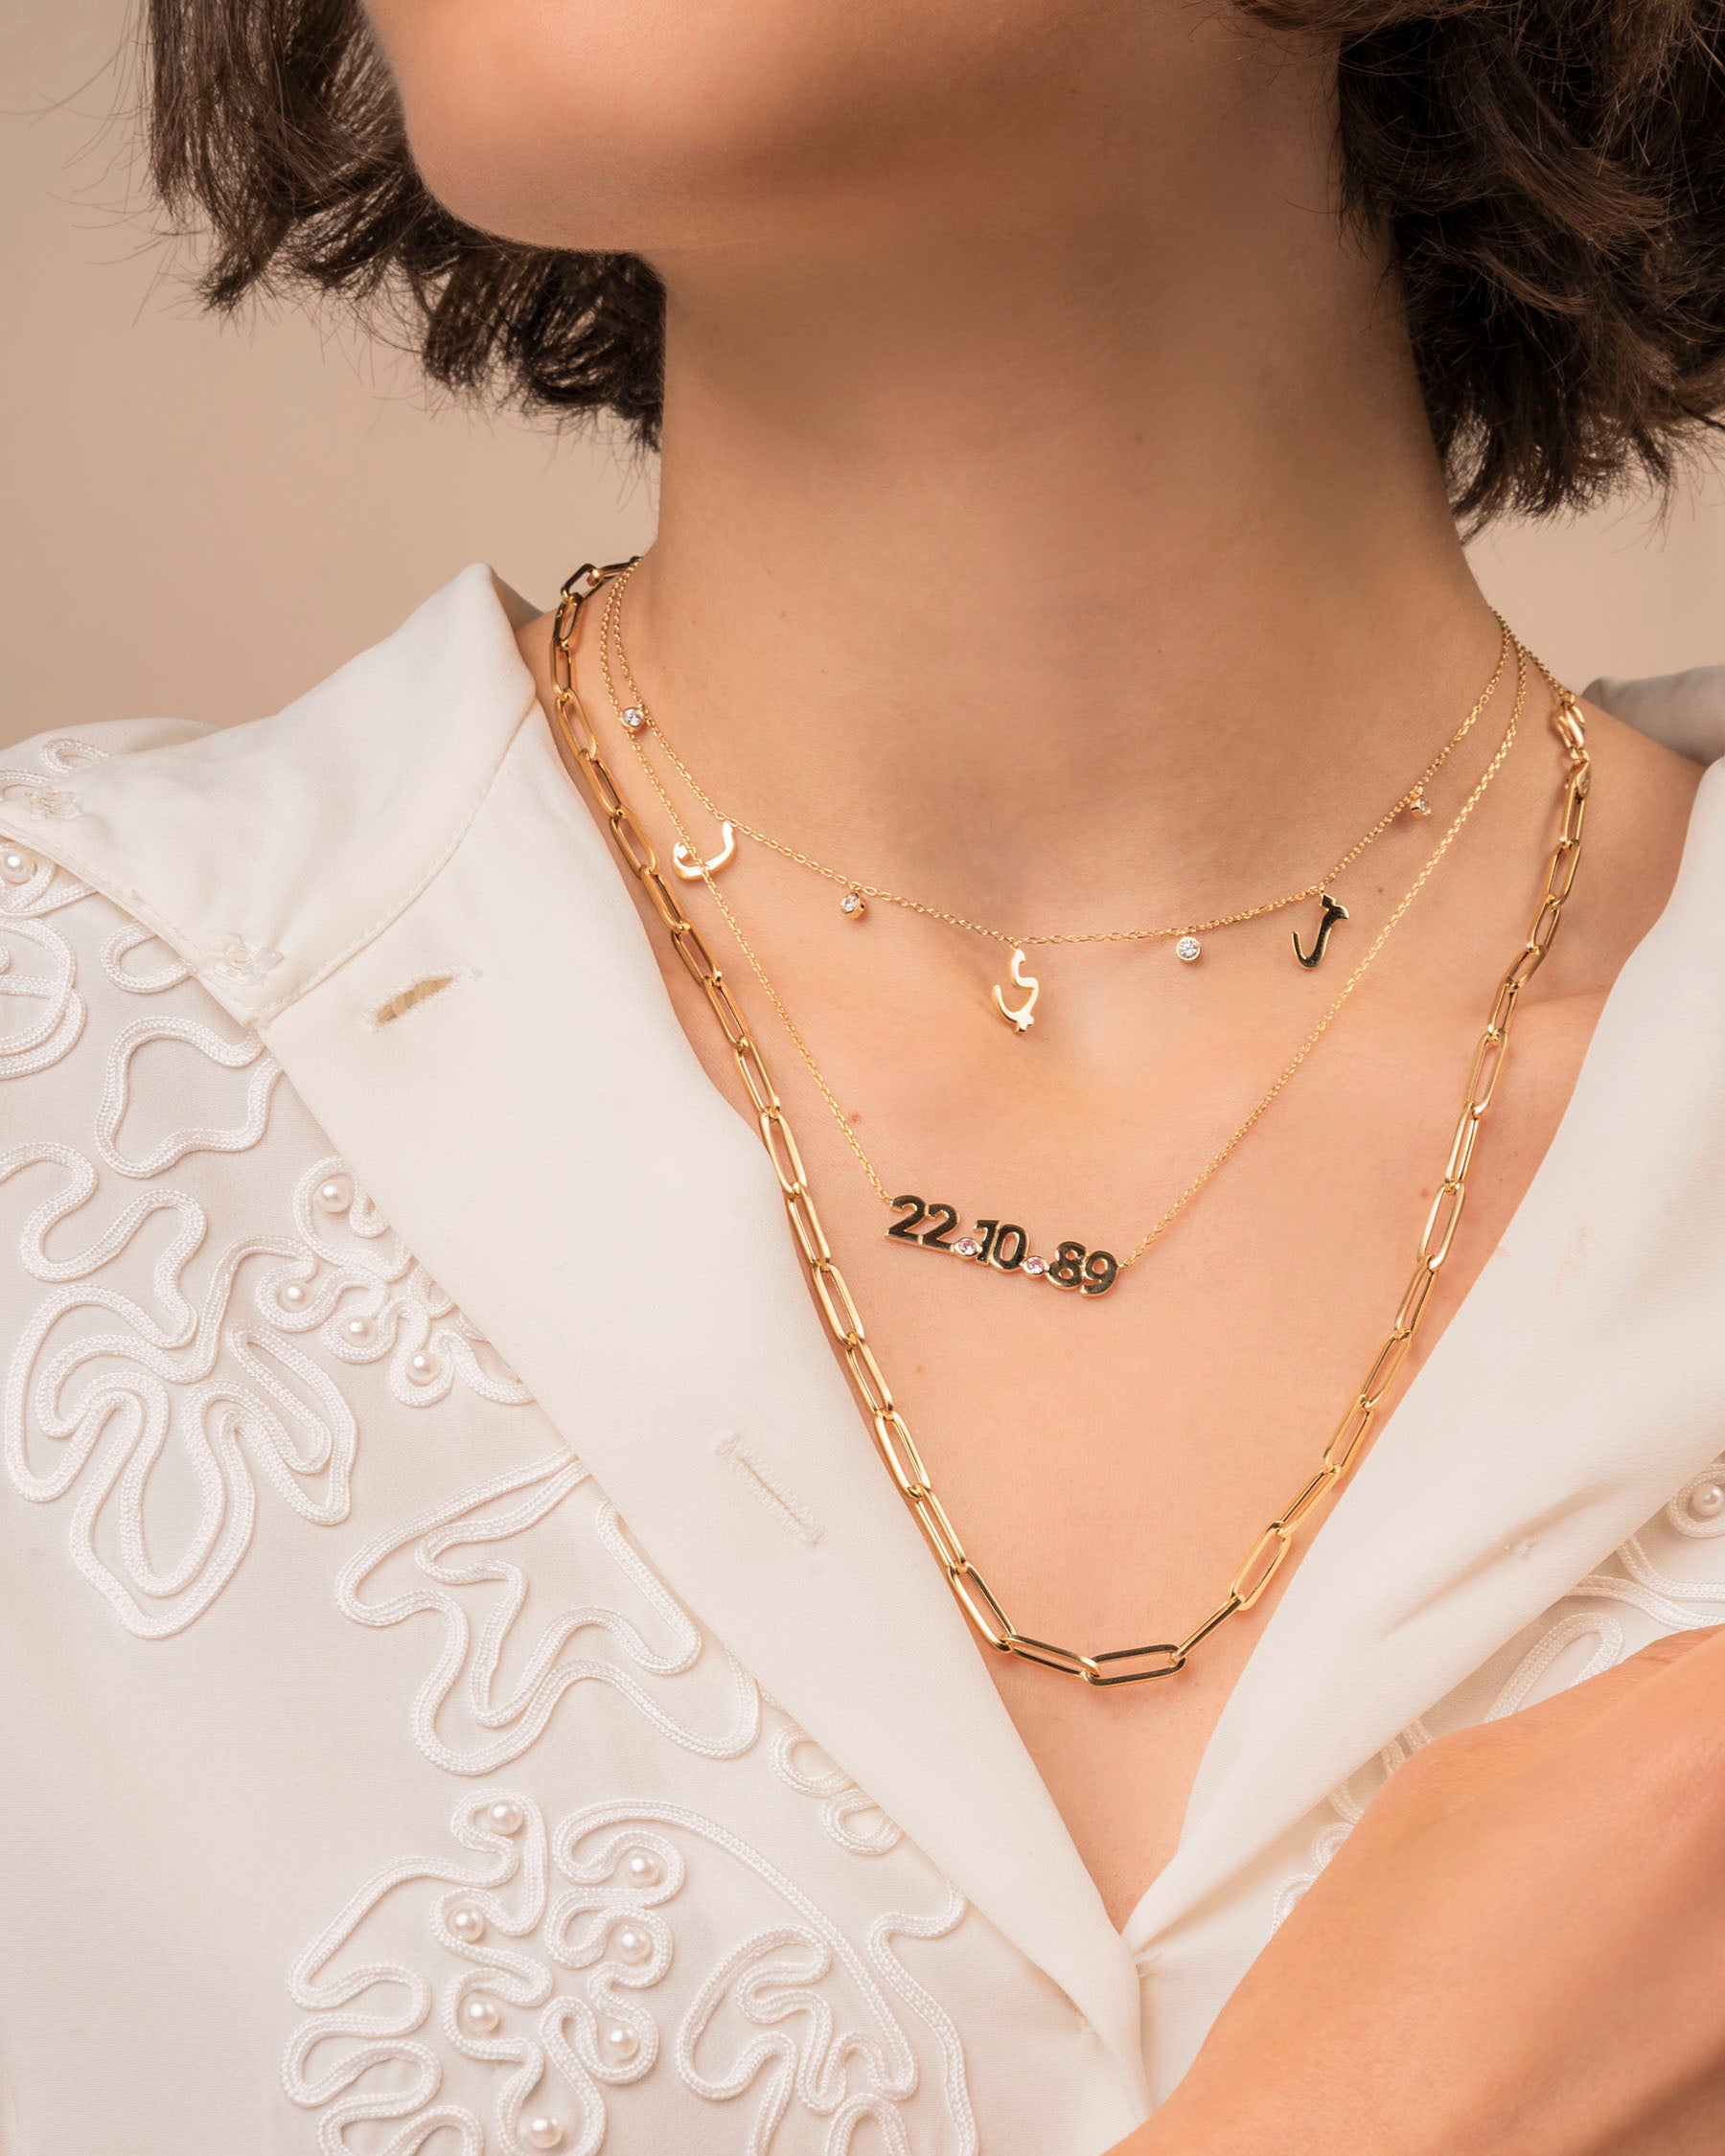 date necklace